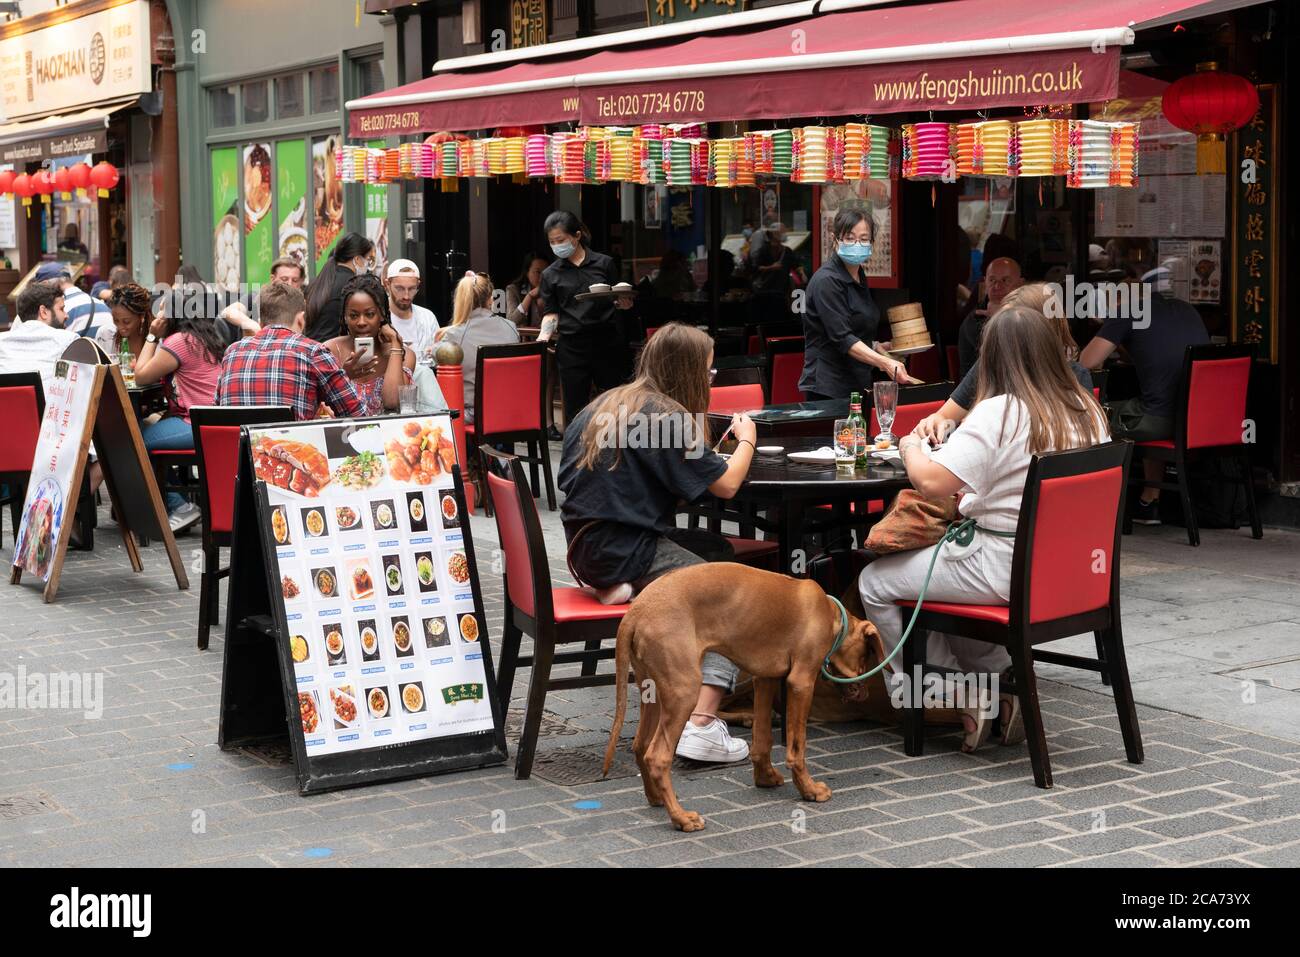 Diners eat food at outdoor restaurant tables in Chinatown during the Eat Out to Help Out scheme offering diners a discount off meals to help boost restaurants and pubs post-lockdown. Stock Photo